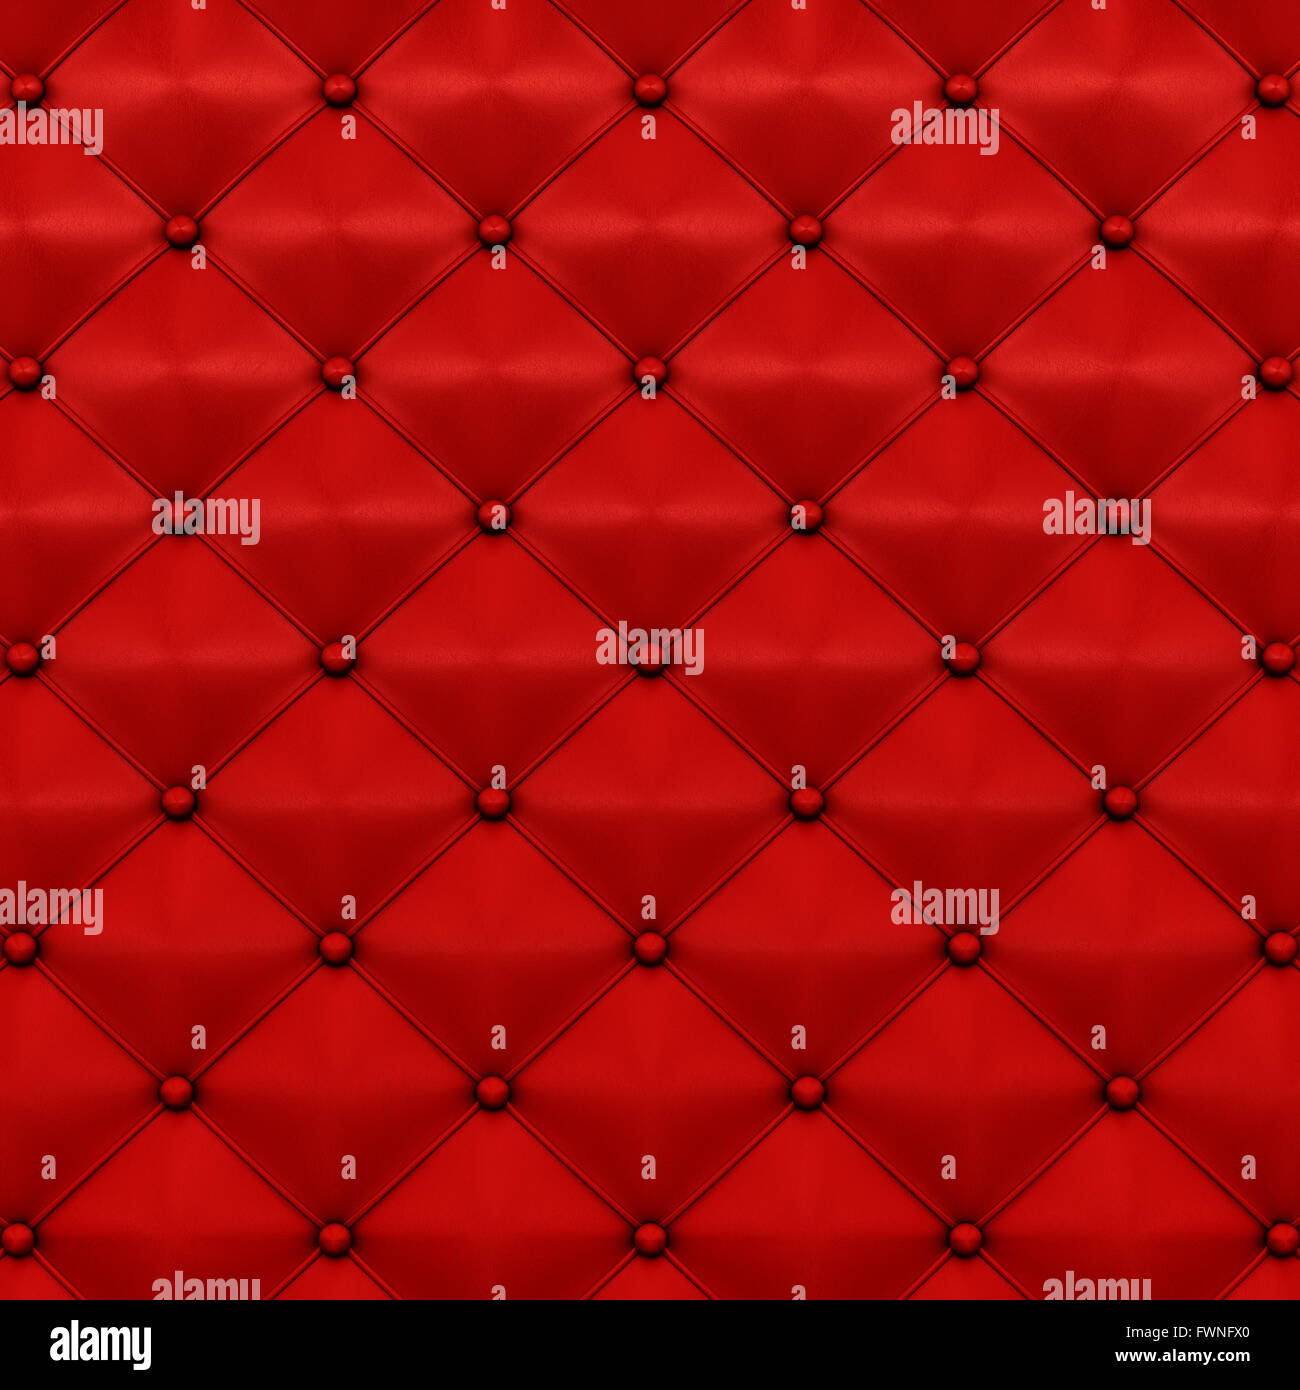 render of red leather texture Stock Photo